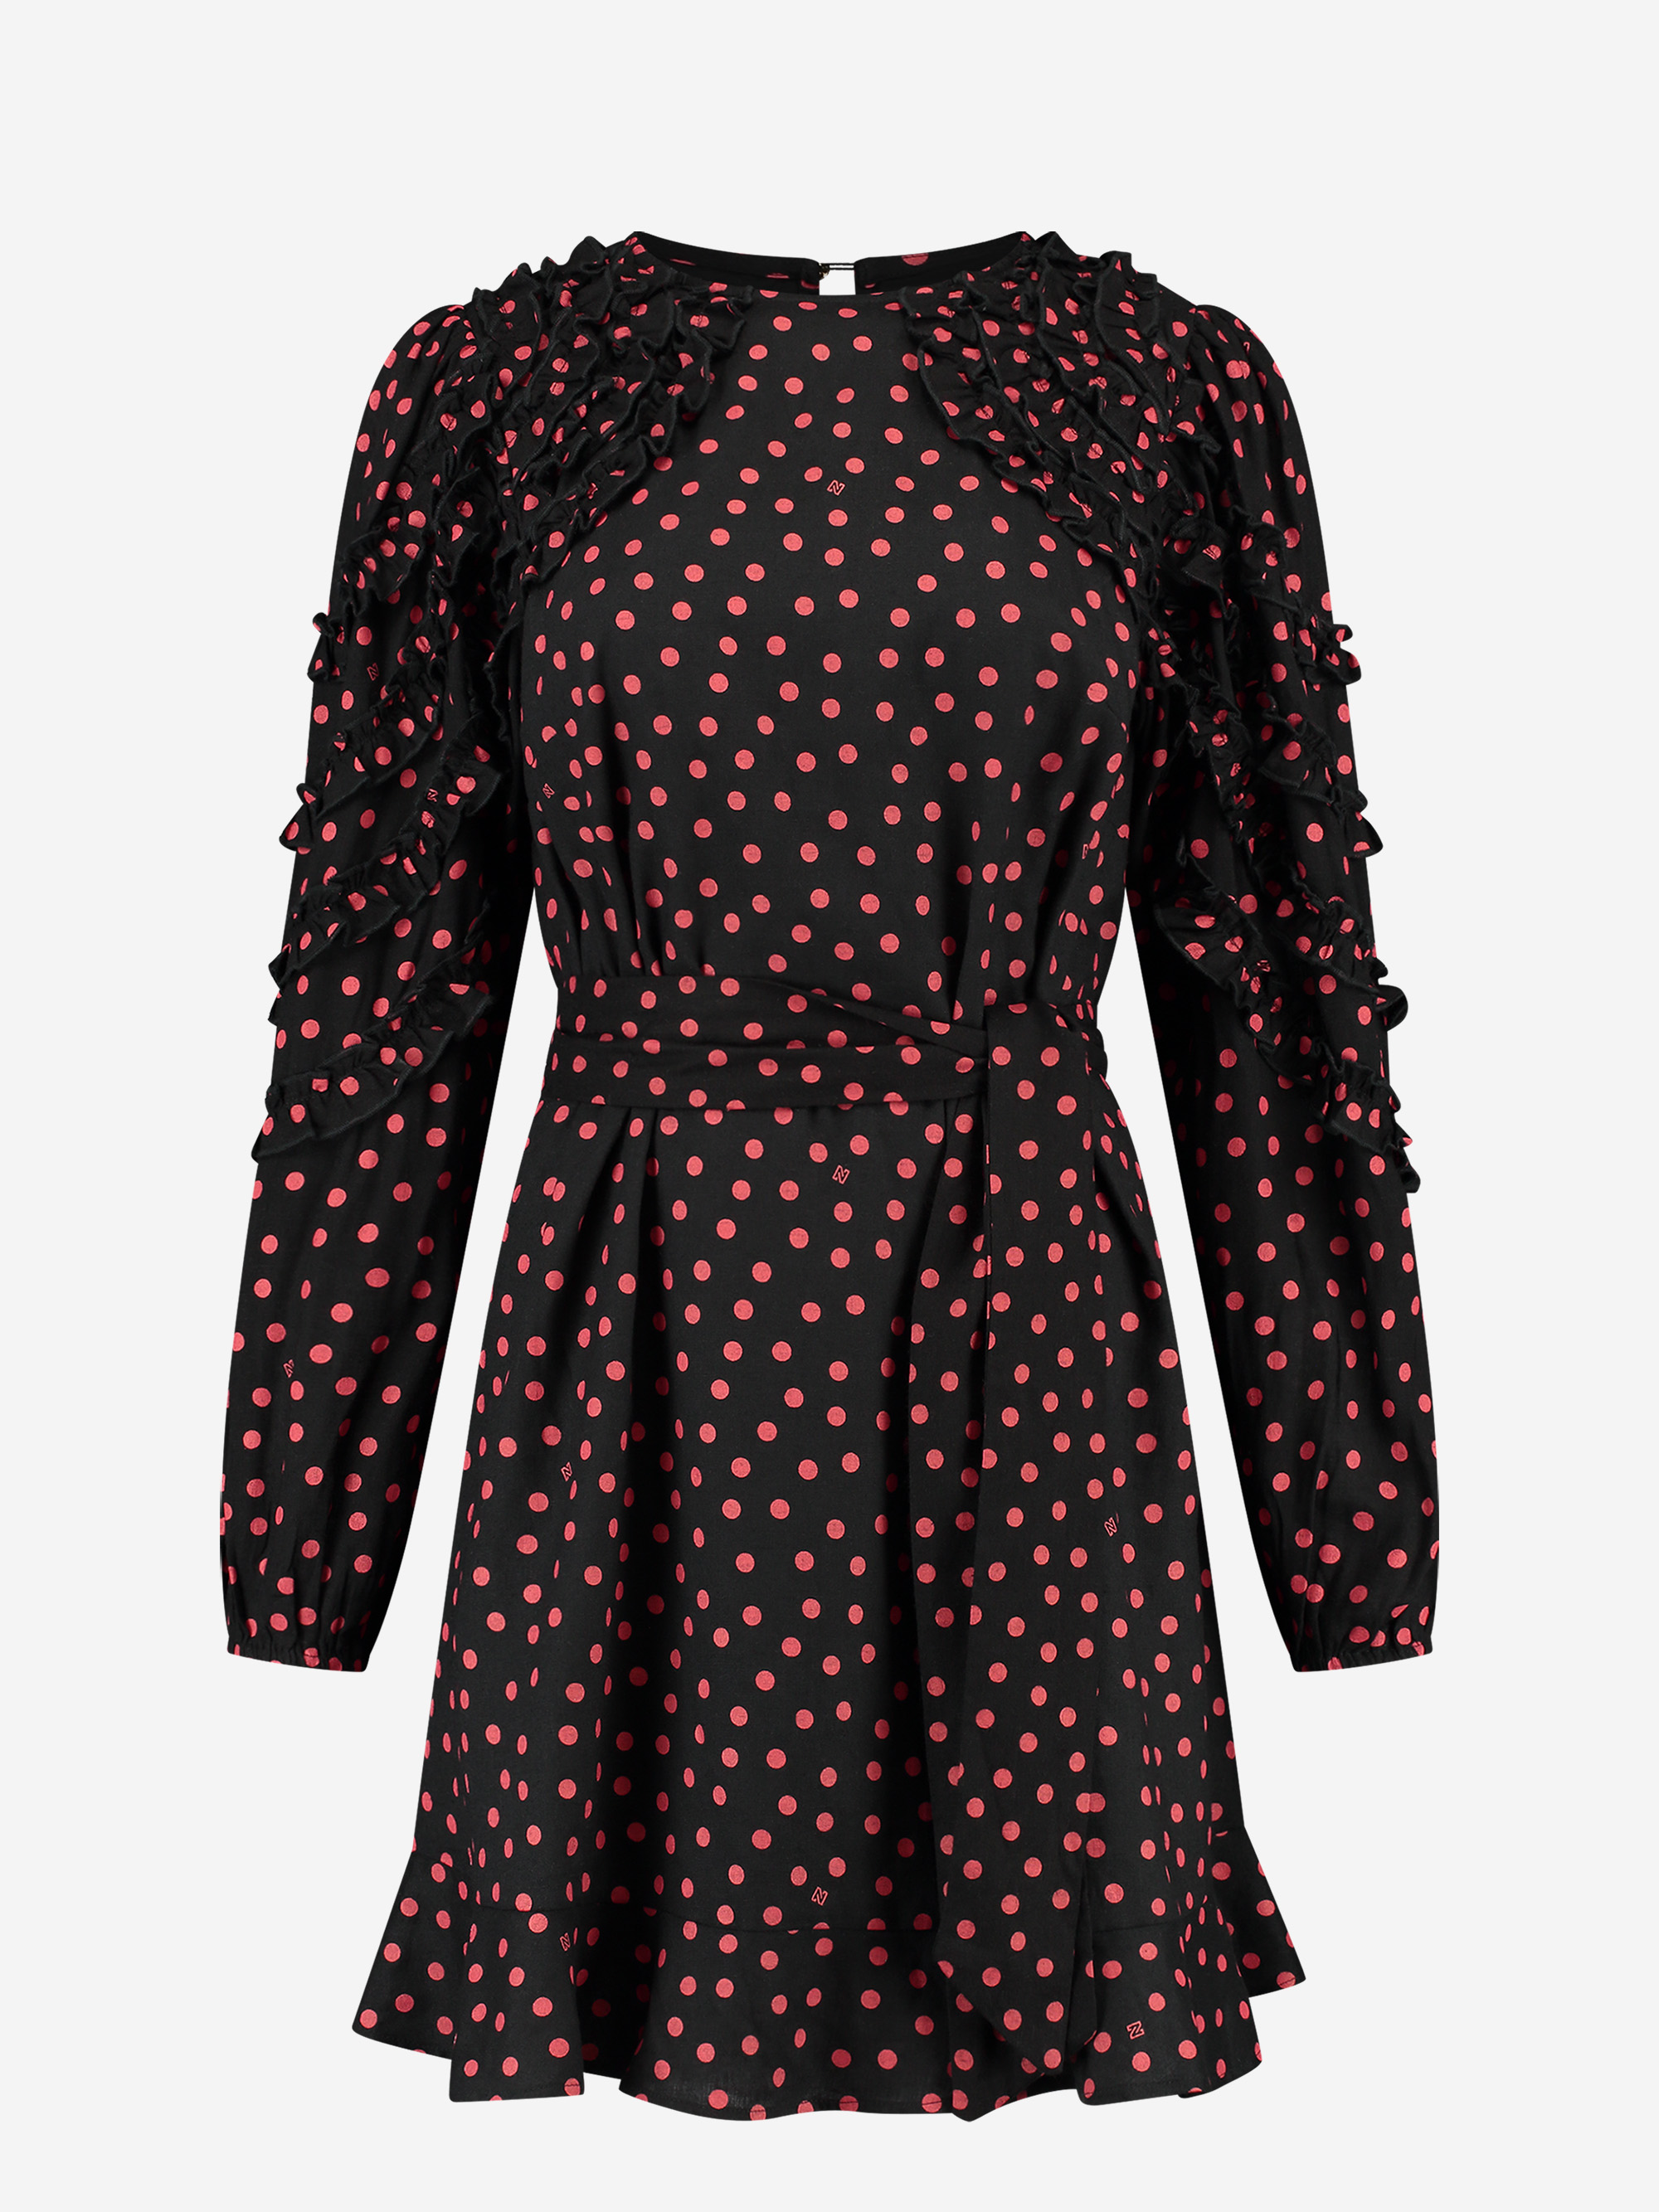 Dotted dress with ruffles